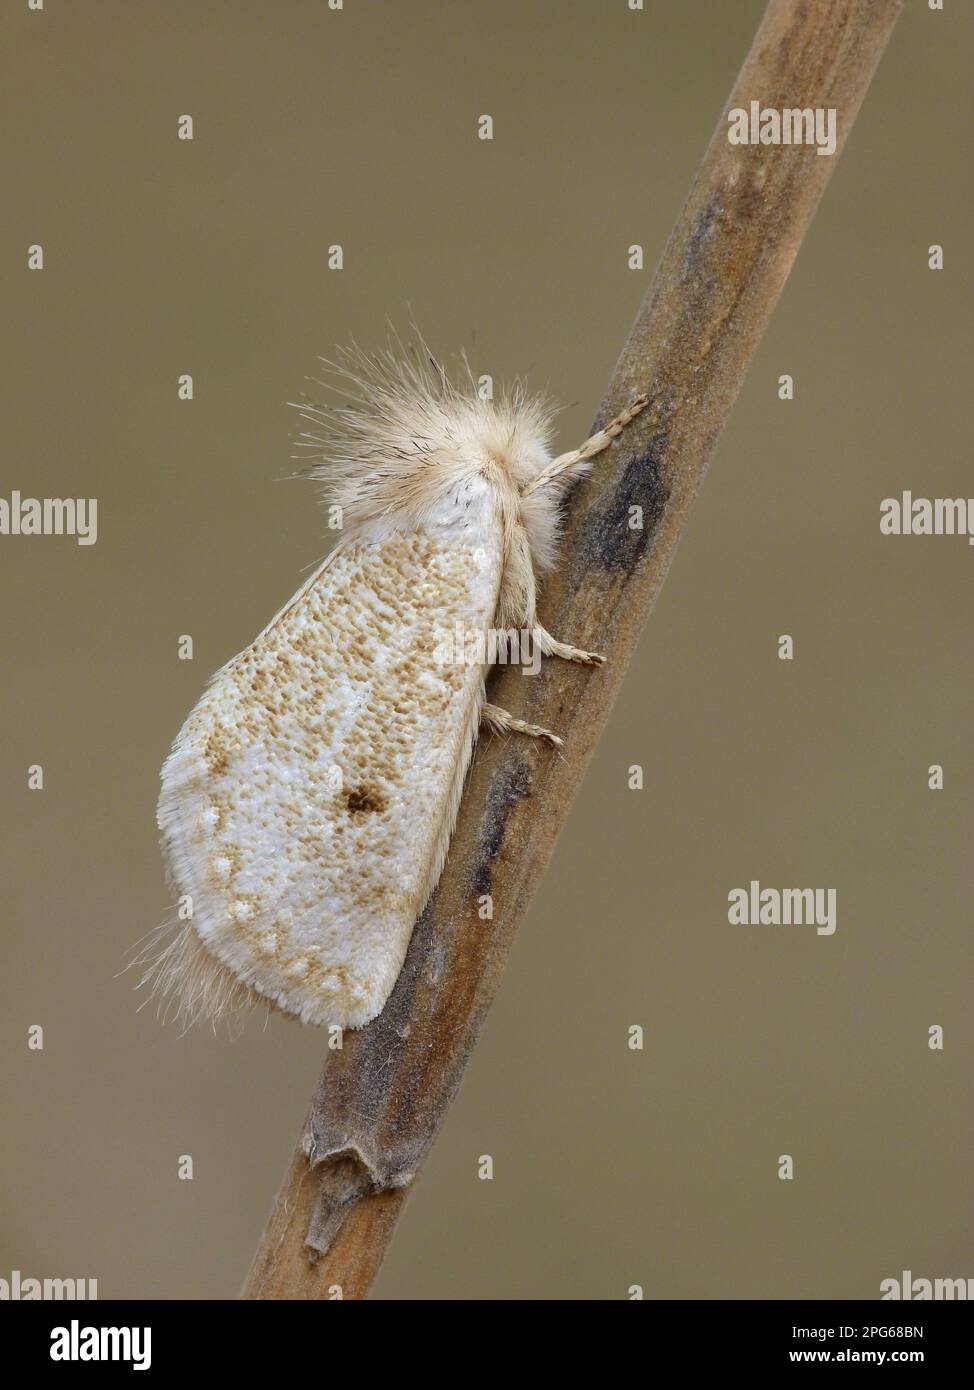 Notodontidae, Insects, Moths, Butterflies, Animals, Other animals, White Epicoma Moth (Epicoma argentata) adult male, roosting on eucalyptus stick Stock Photo